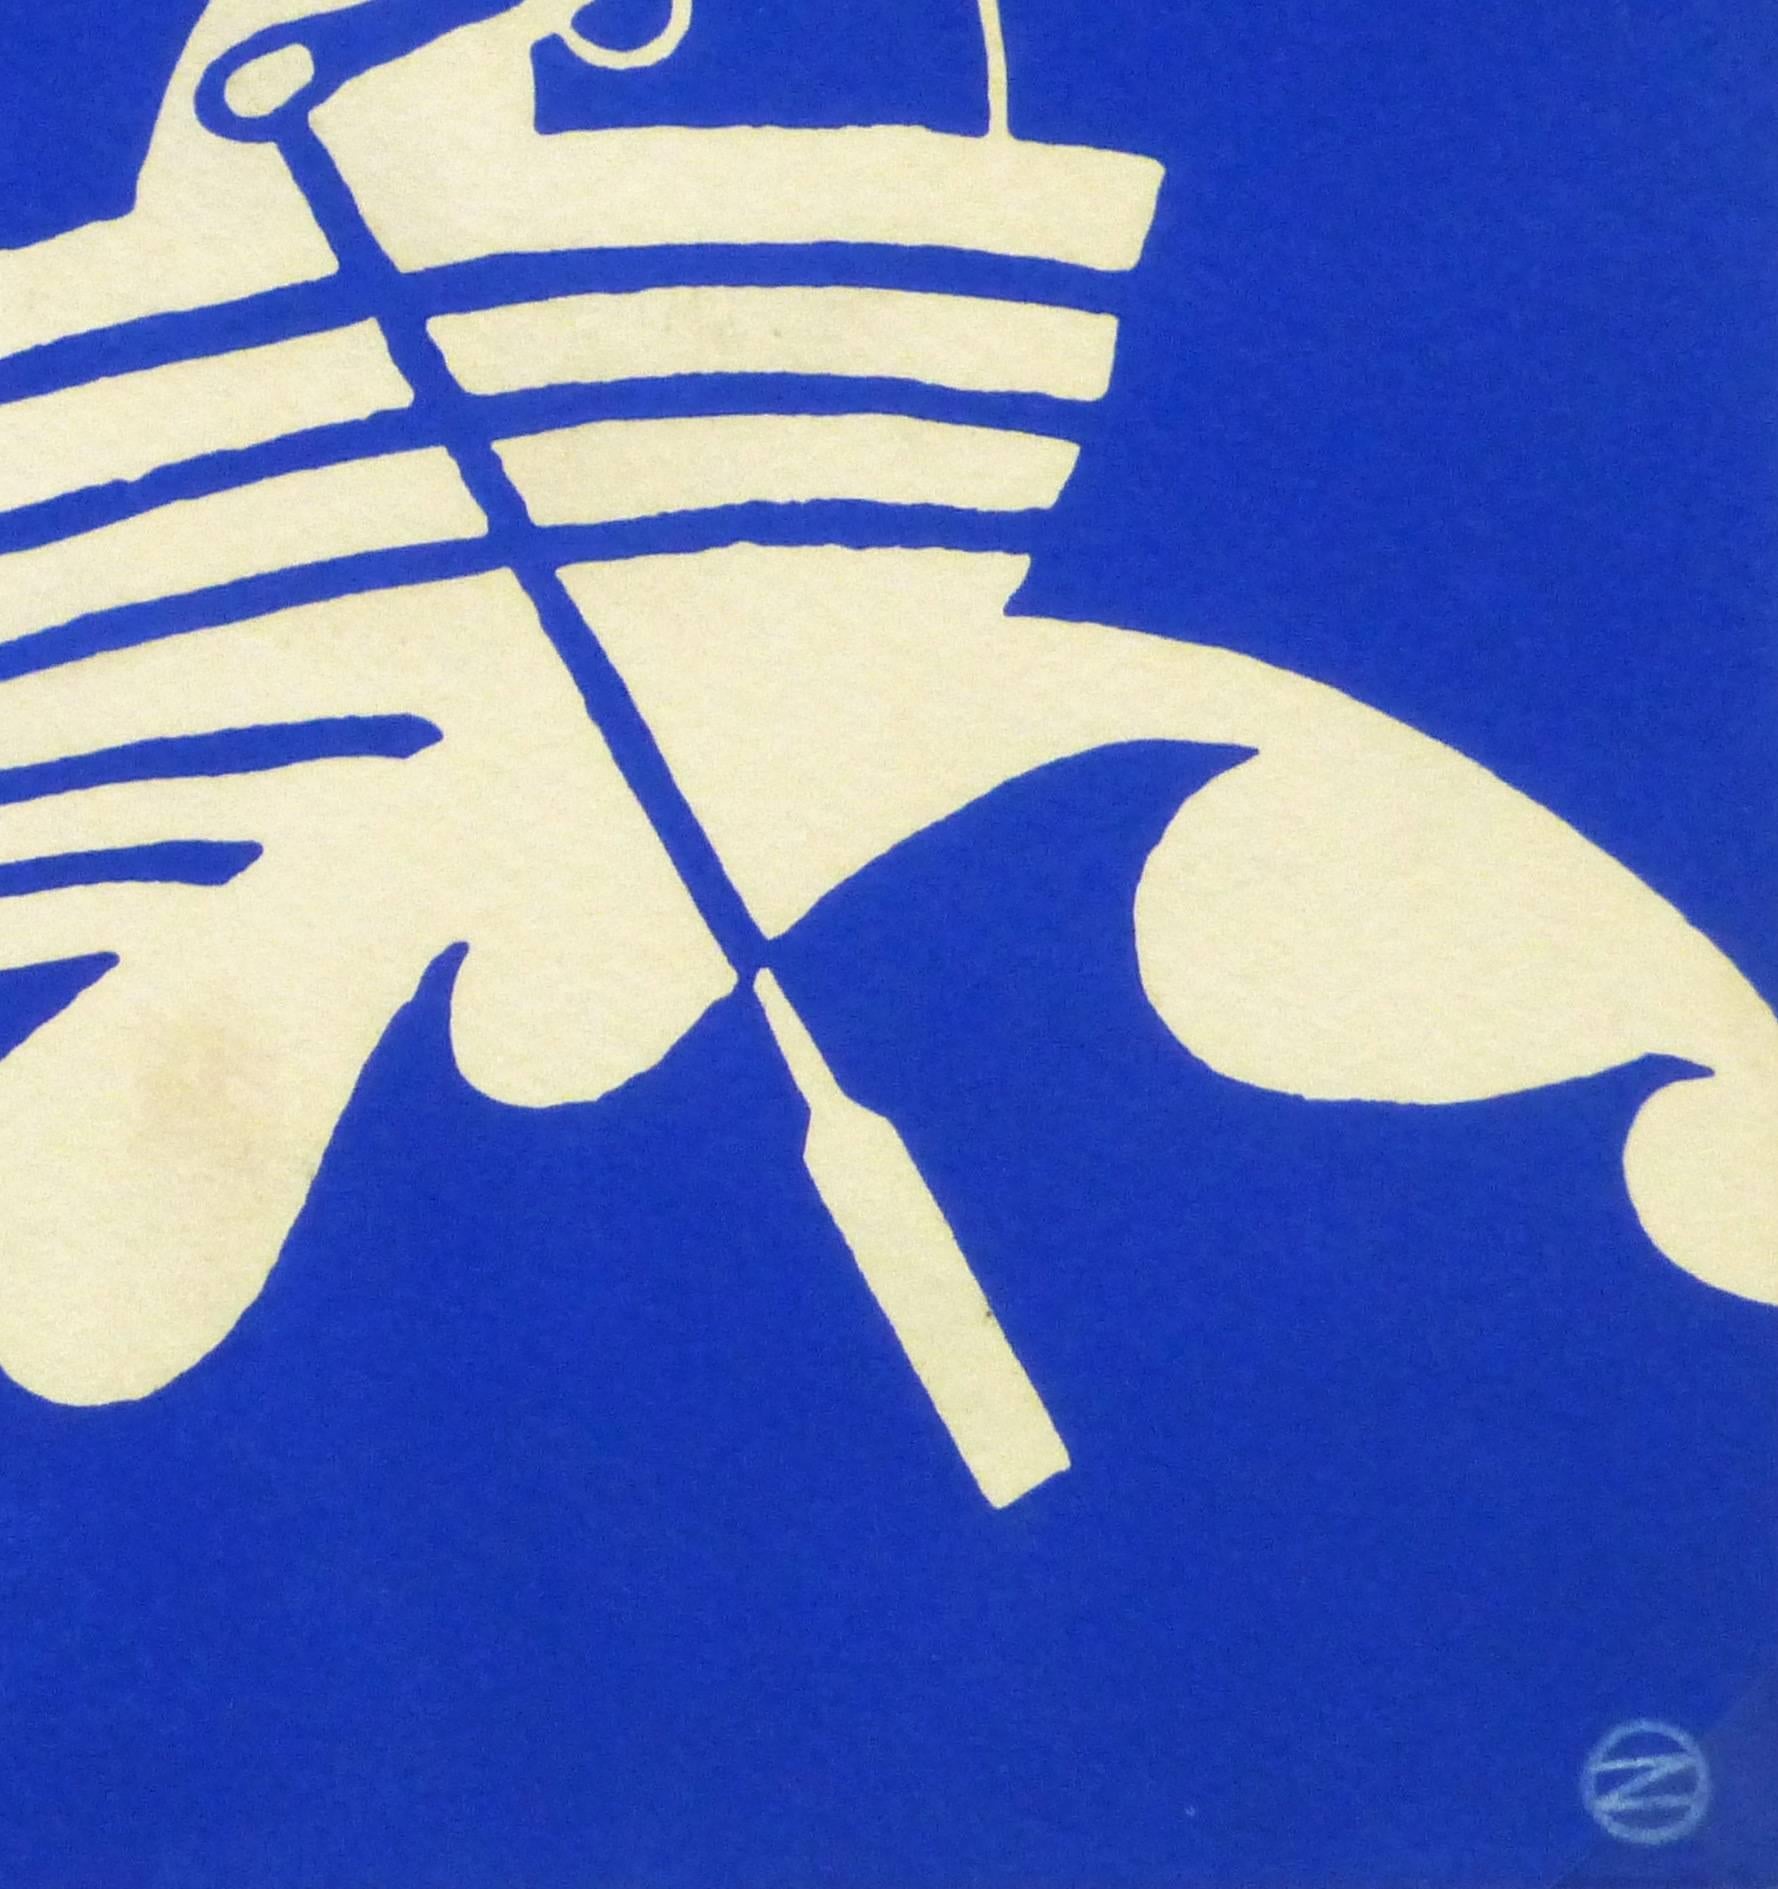 Lively and bright French fine art lithograph of a couple navigating the waves in a small row boat, circa 1960. Signed lower right.

Original one-of-a-kind artwork on paper displayed on a white mat with a gold border. Mat fits a standard-size